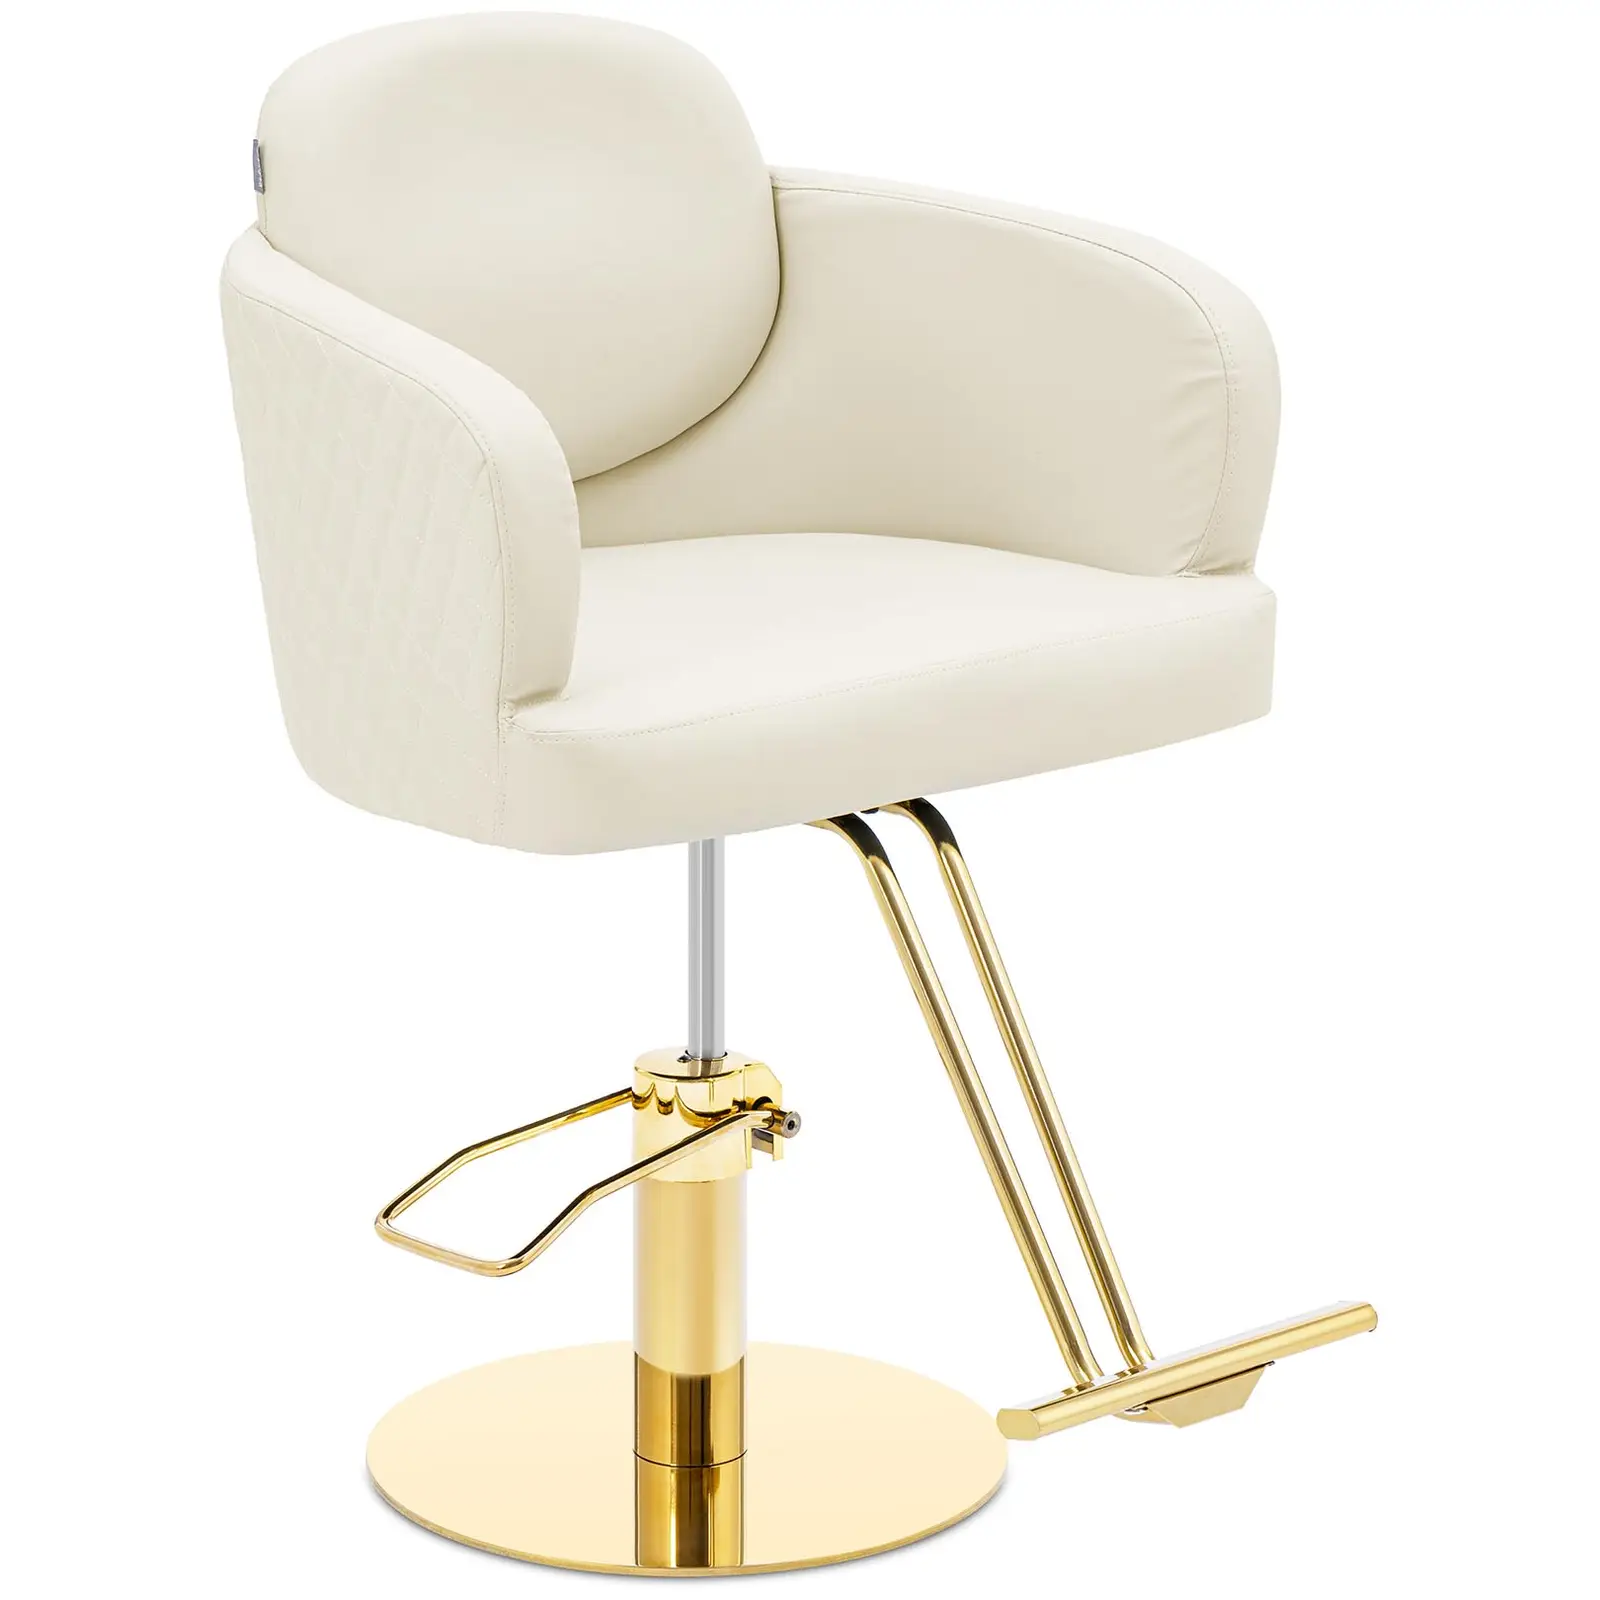 Salon Chair with Footrest - 870 - 1020 mm - 200 kg - cream / gold